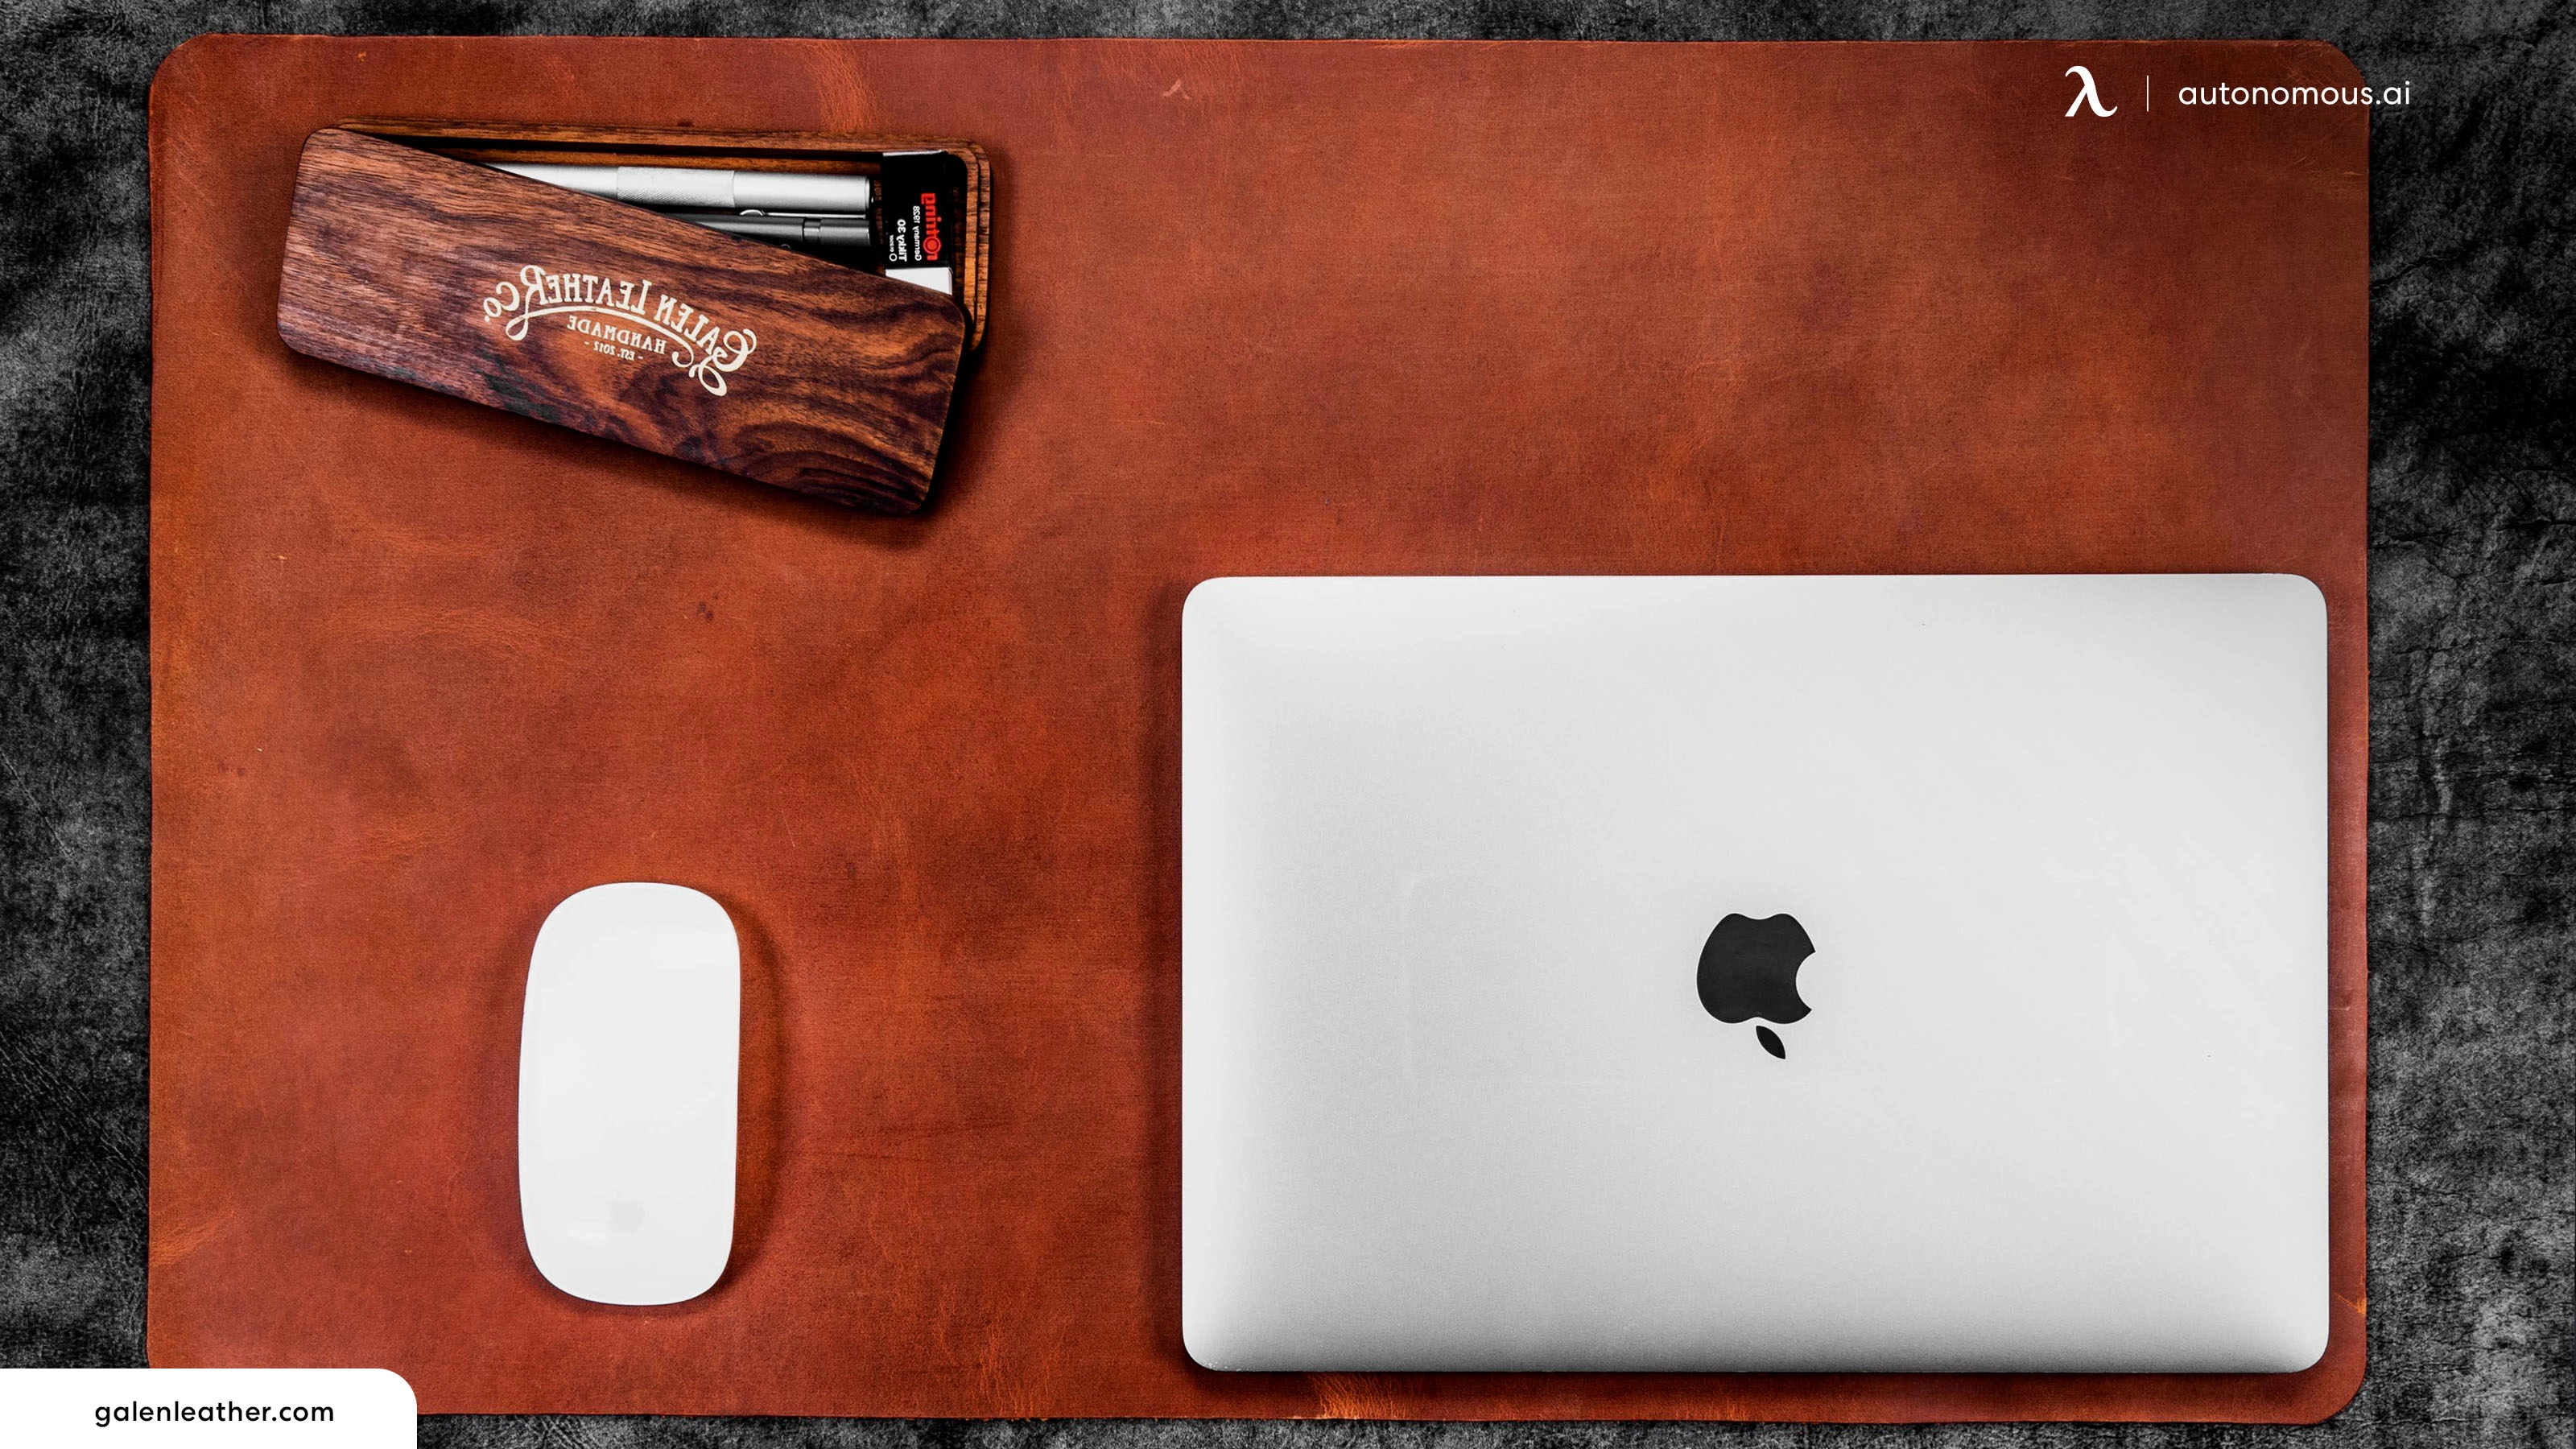 Are You Looking for a Leather Desk Blotter? 10+ Awesome Options